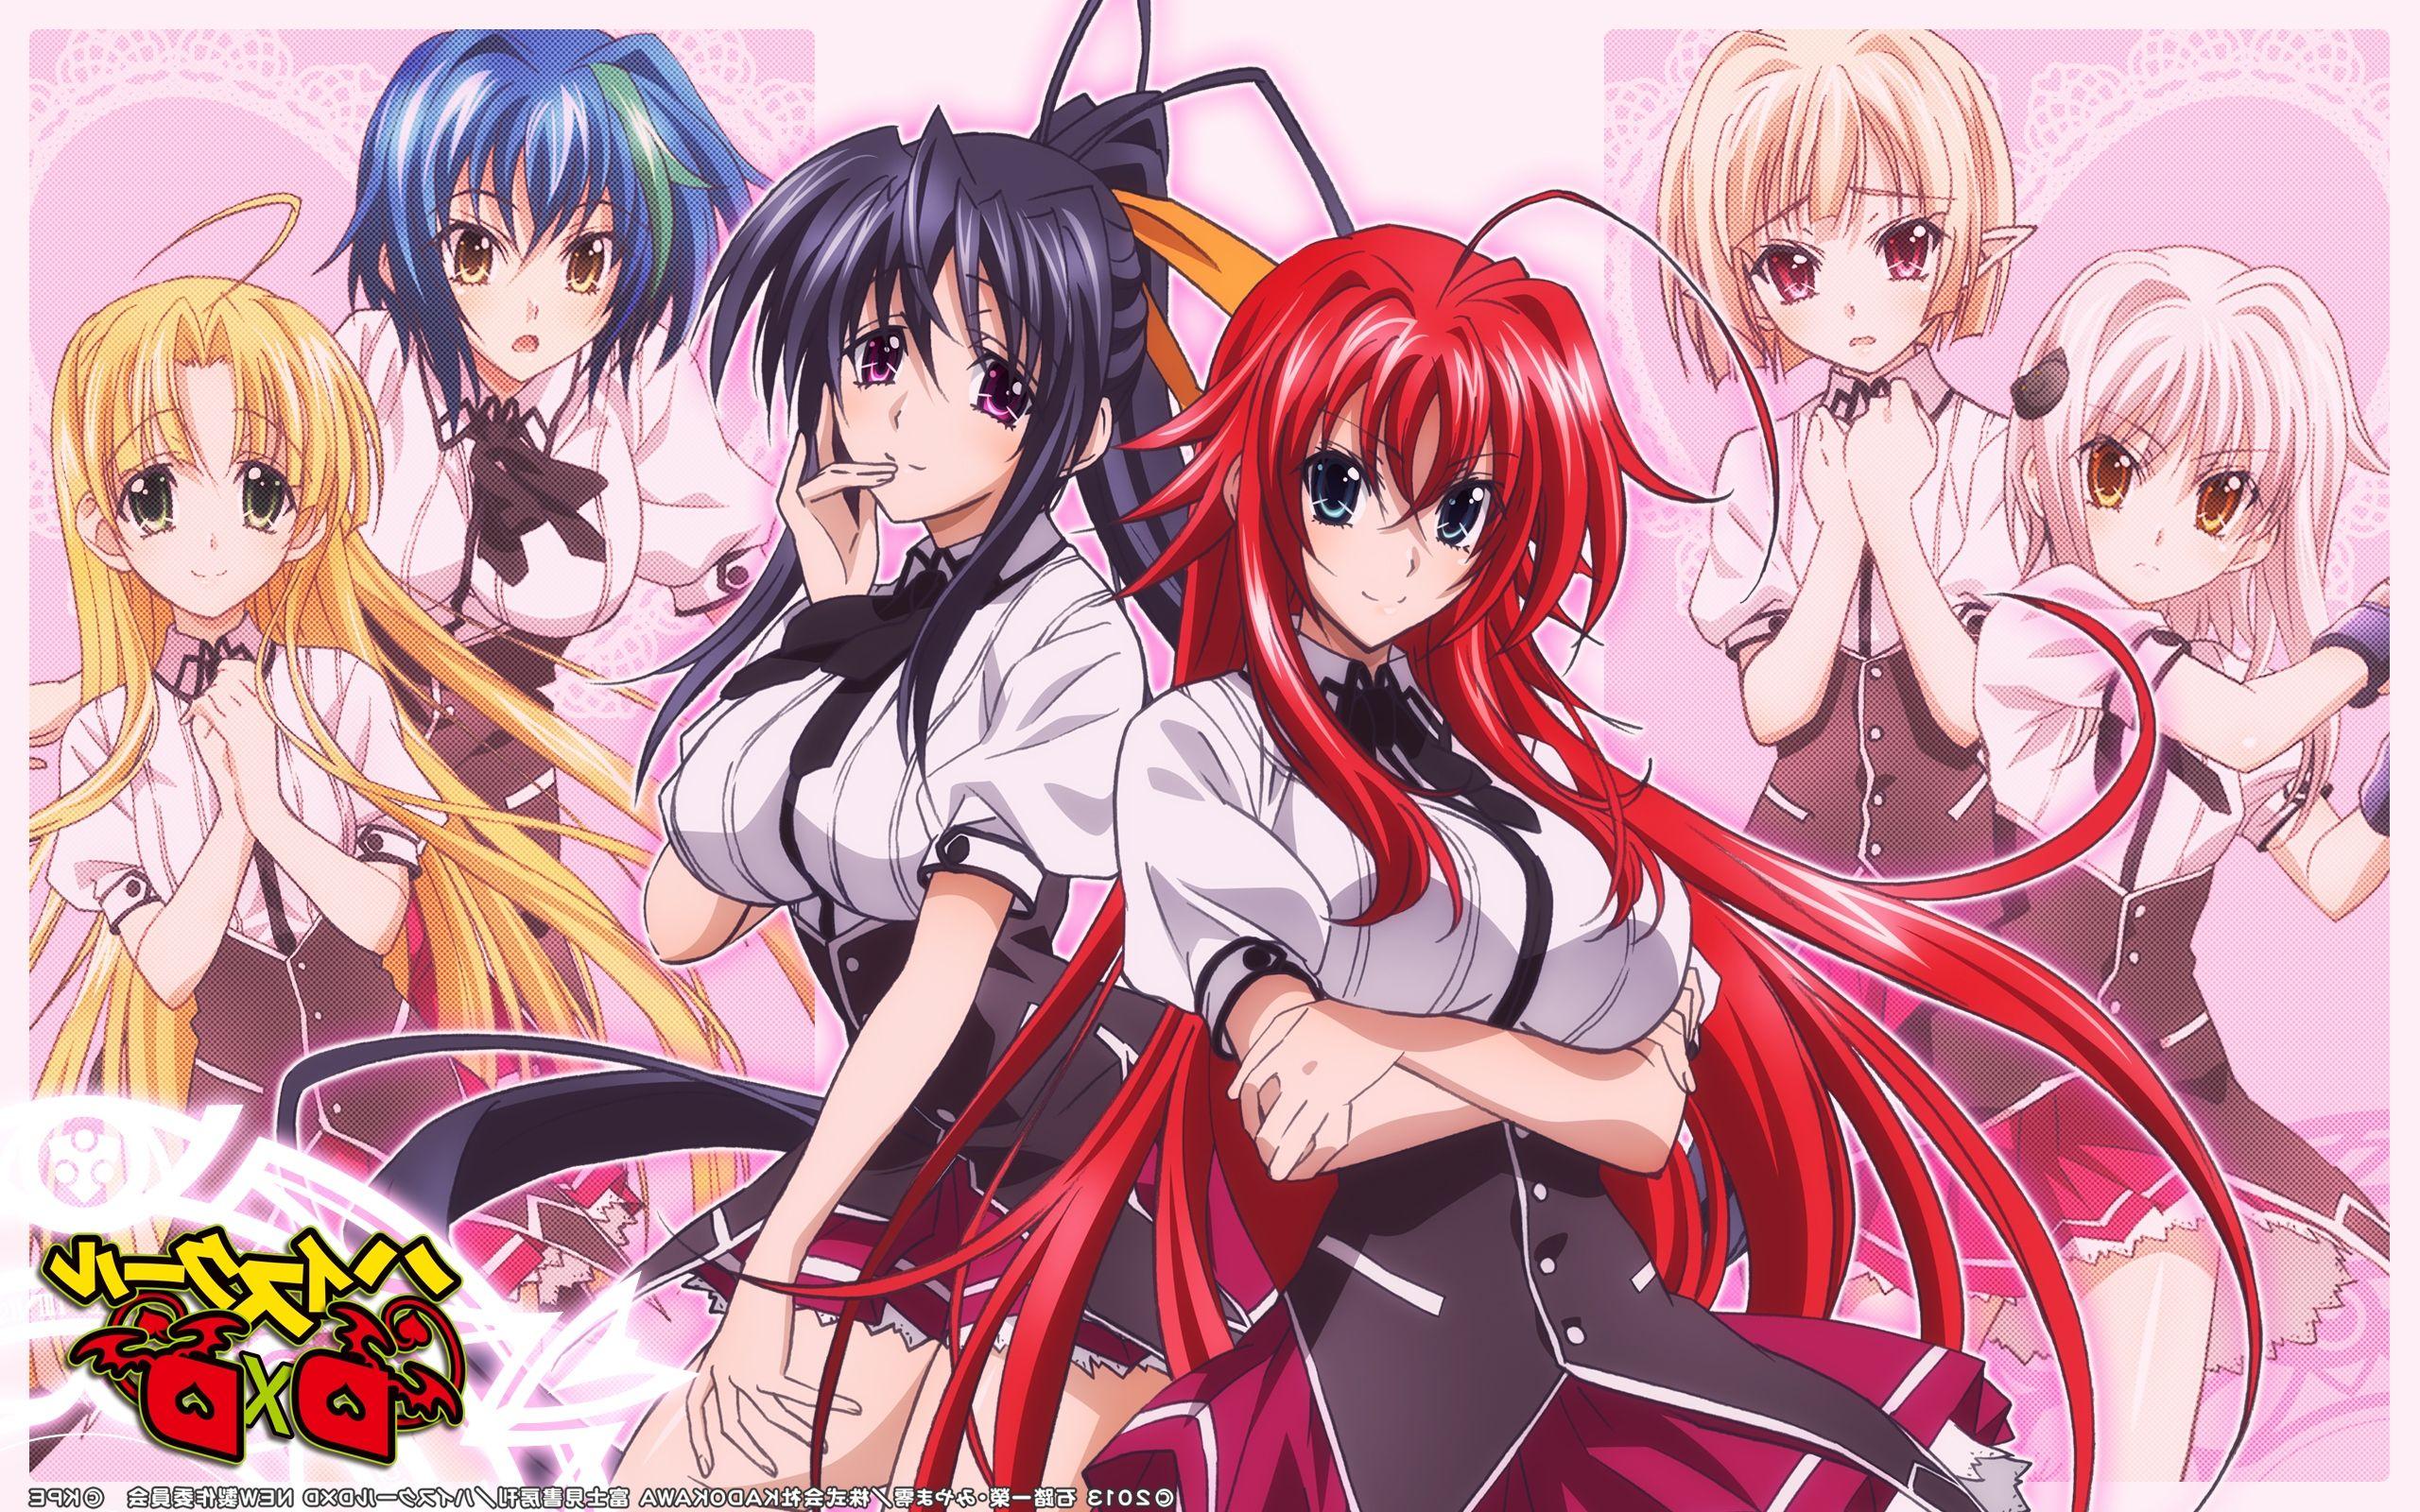 High School DxD Wallpapers - Top Free High School DxD ...